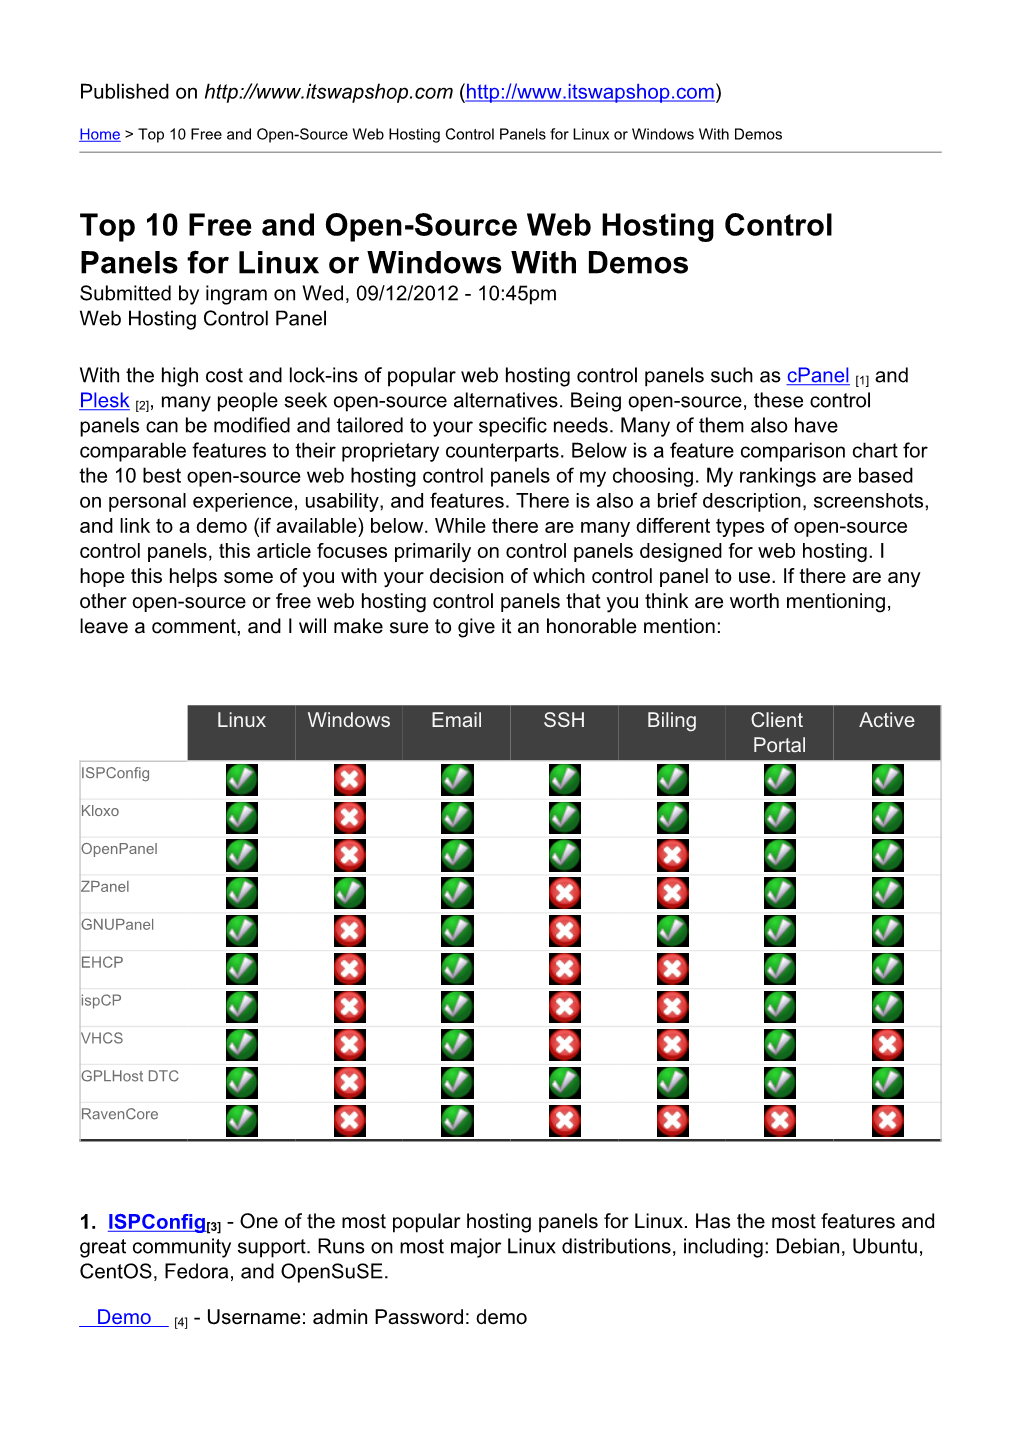 Top 10 Free and Open-Source Web Hosting Control Panels for Linux Or Windows with Demos